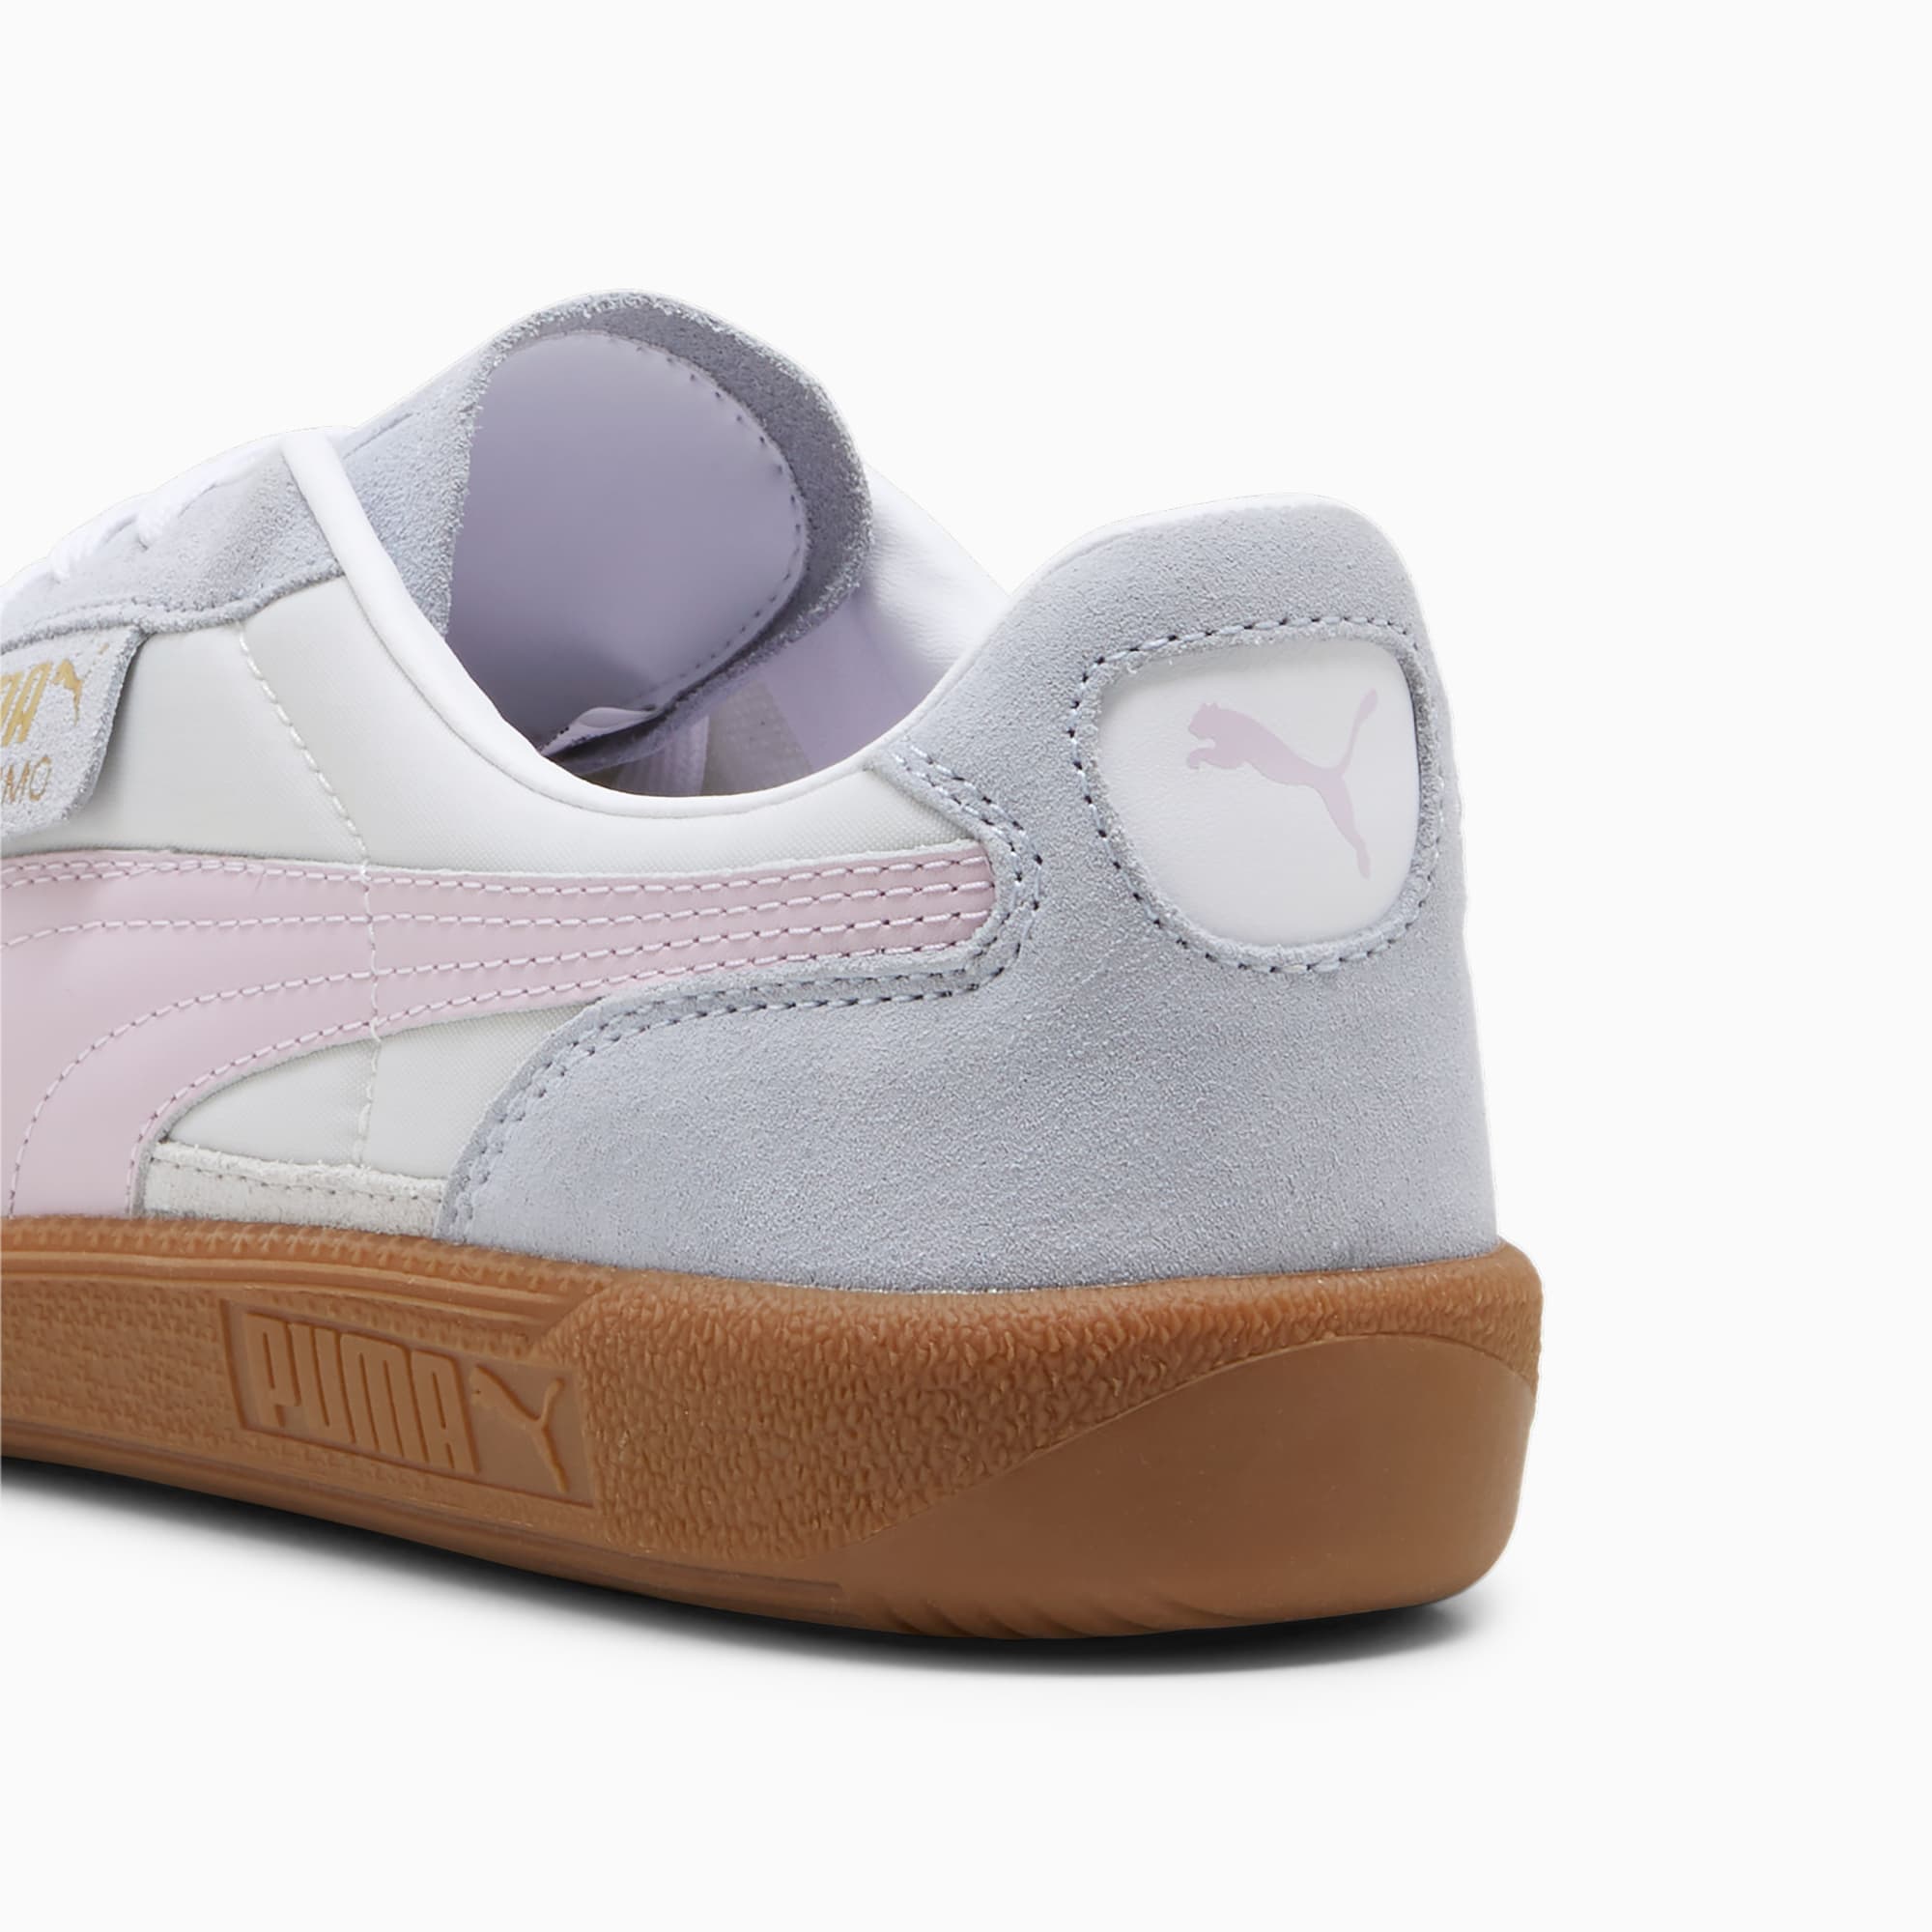 Women's PUMA Palermo OG Sneakers, Feather Grey/Grey Fog/Grape Mist, Size 35,5, Shoes